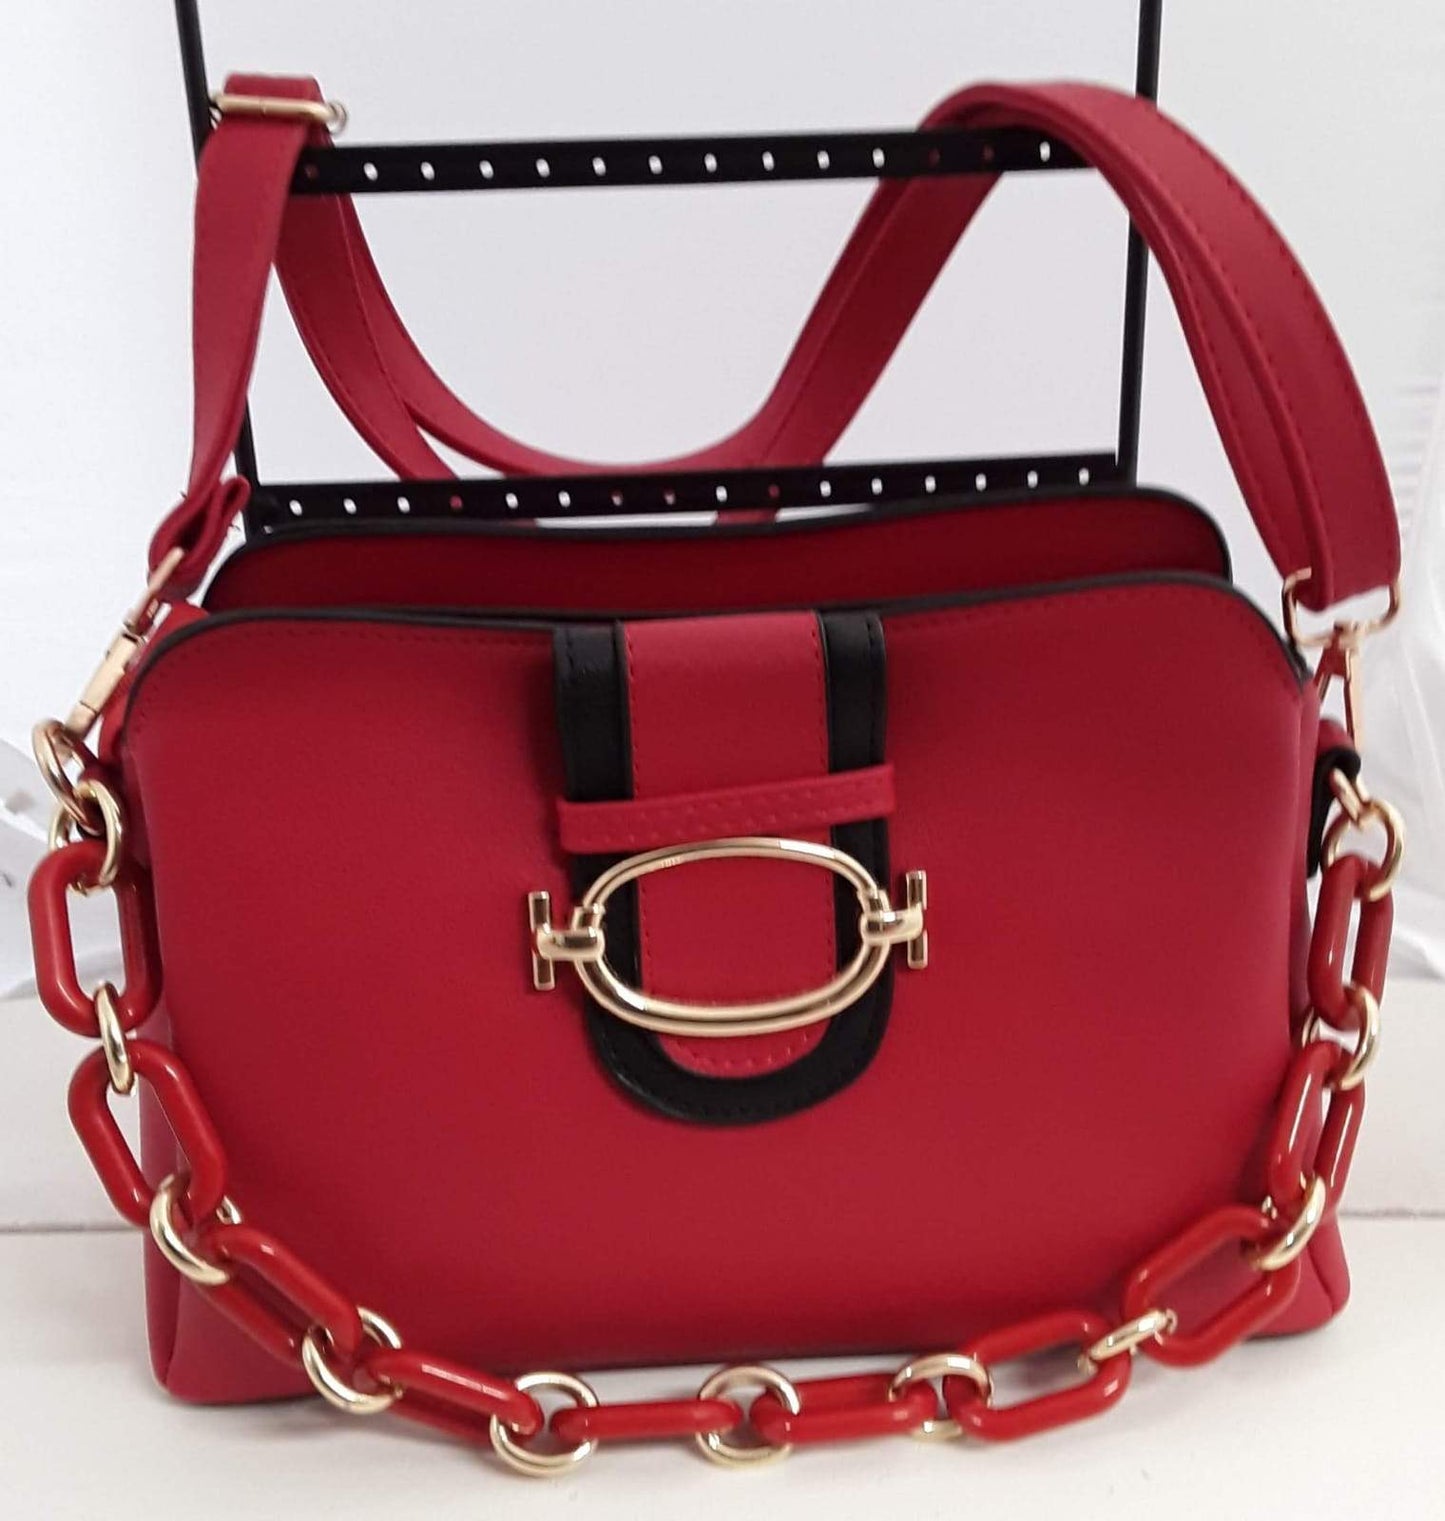 Lovely Firebrick Hand Bag with Chain Link Strap